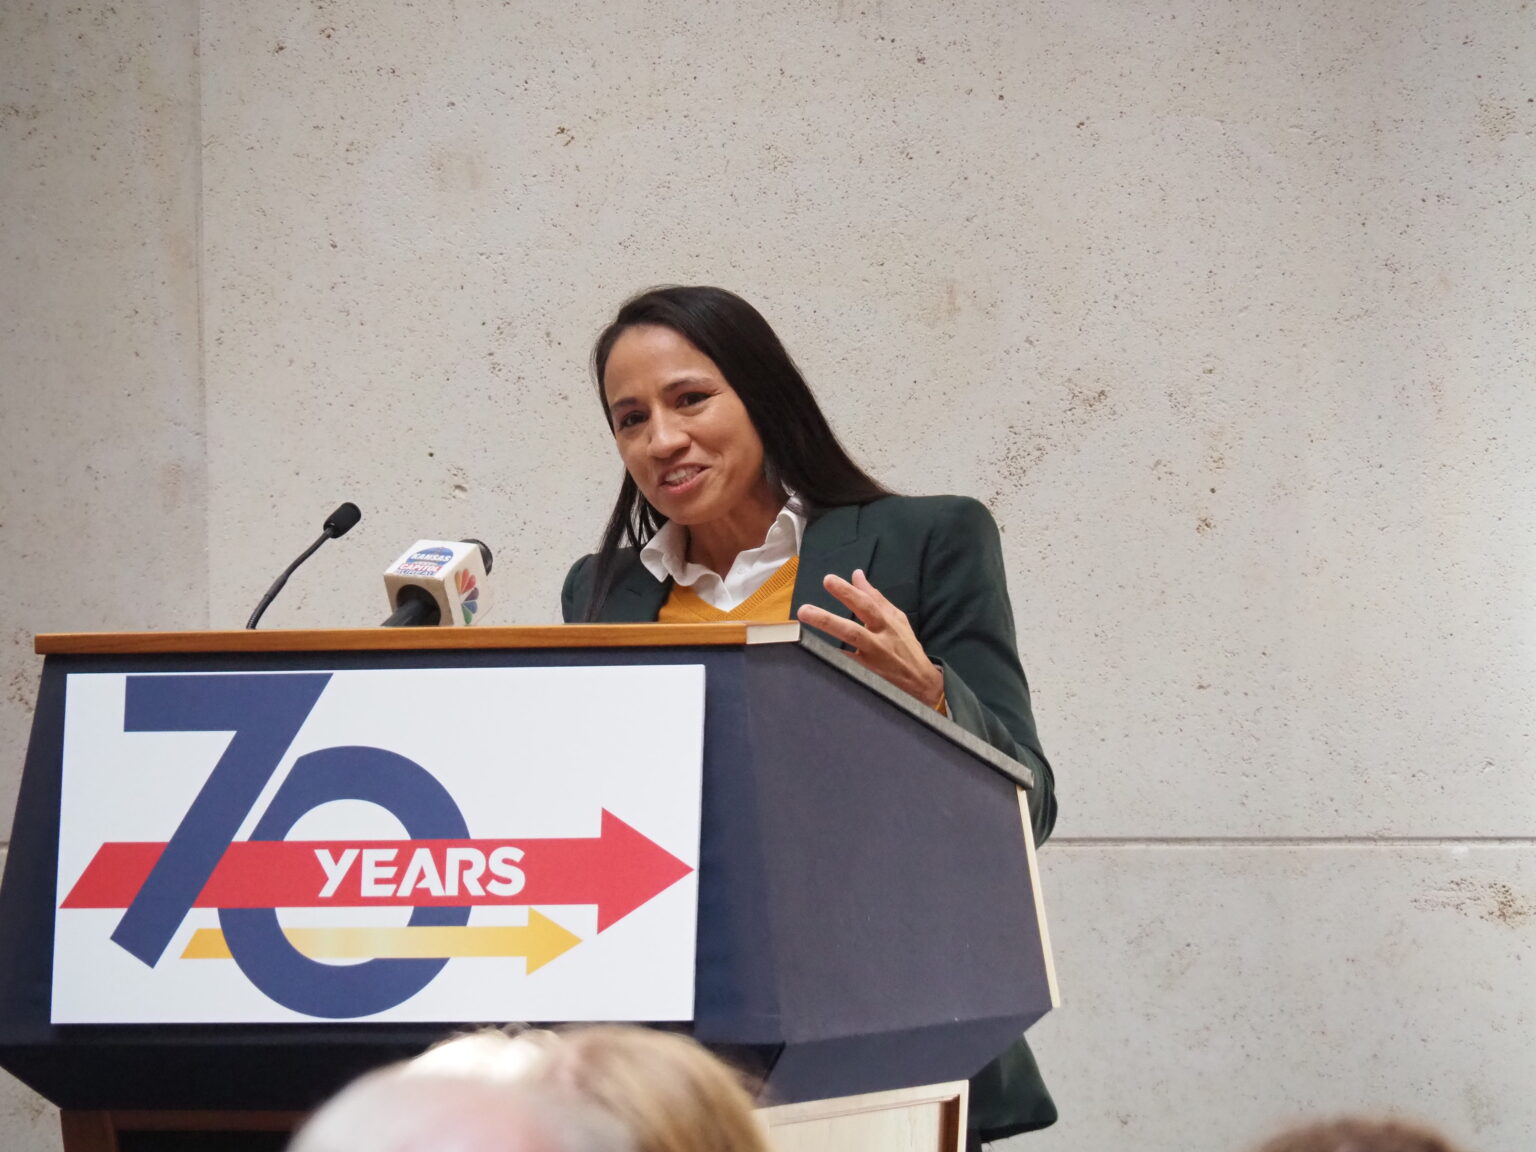 U.S. Rep. Sharice Davids, a 3rd District Democrat, hailed actions 70 years ago to create the U.S. Small Business Administration. She said the federal government needs to further expand broadband access to help companies grow and prosper. (Tim Carpenter/Kansas Reflector)